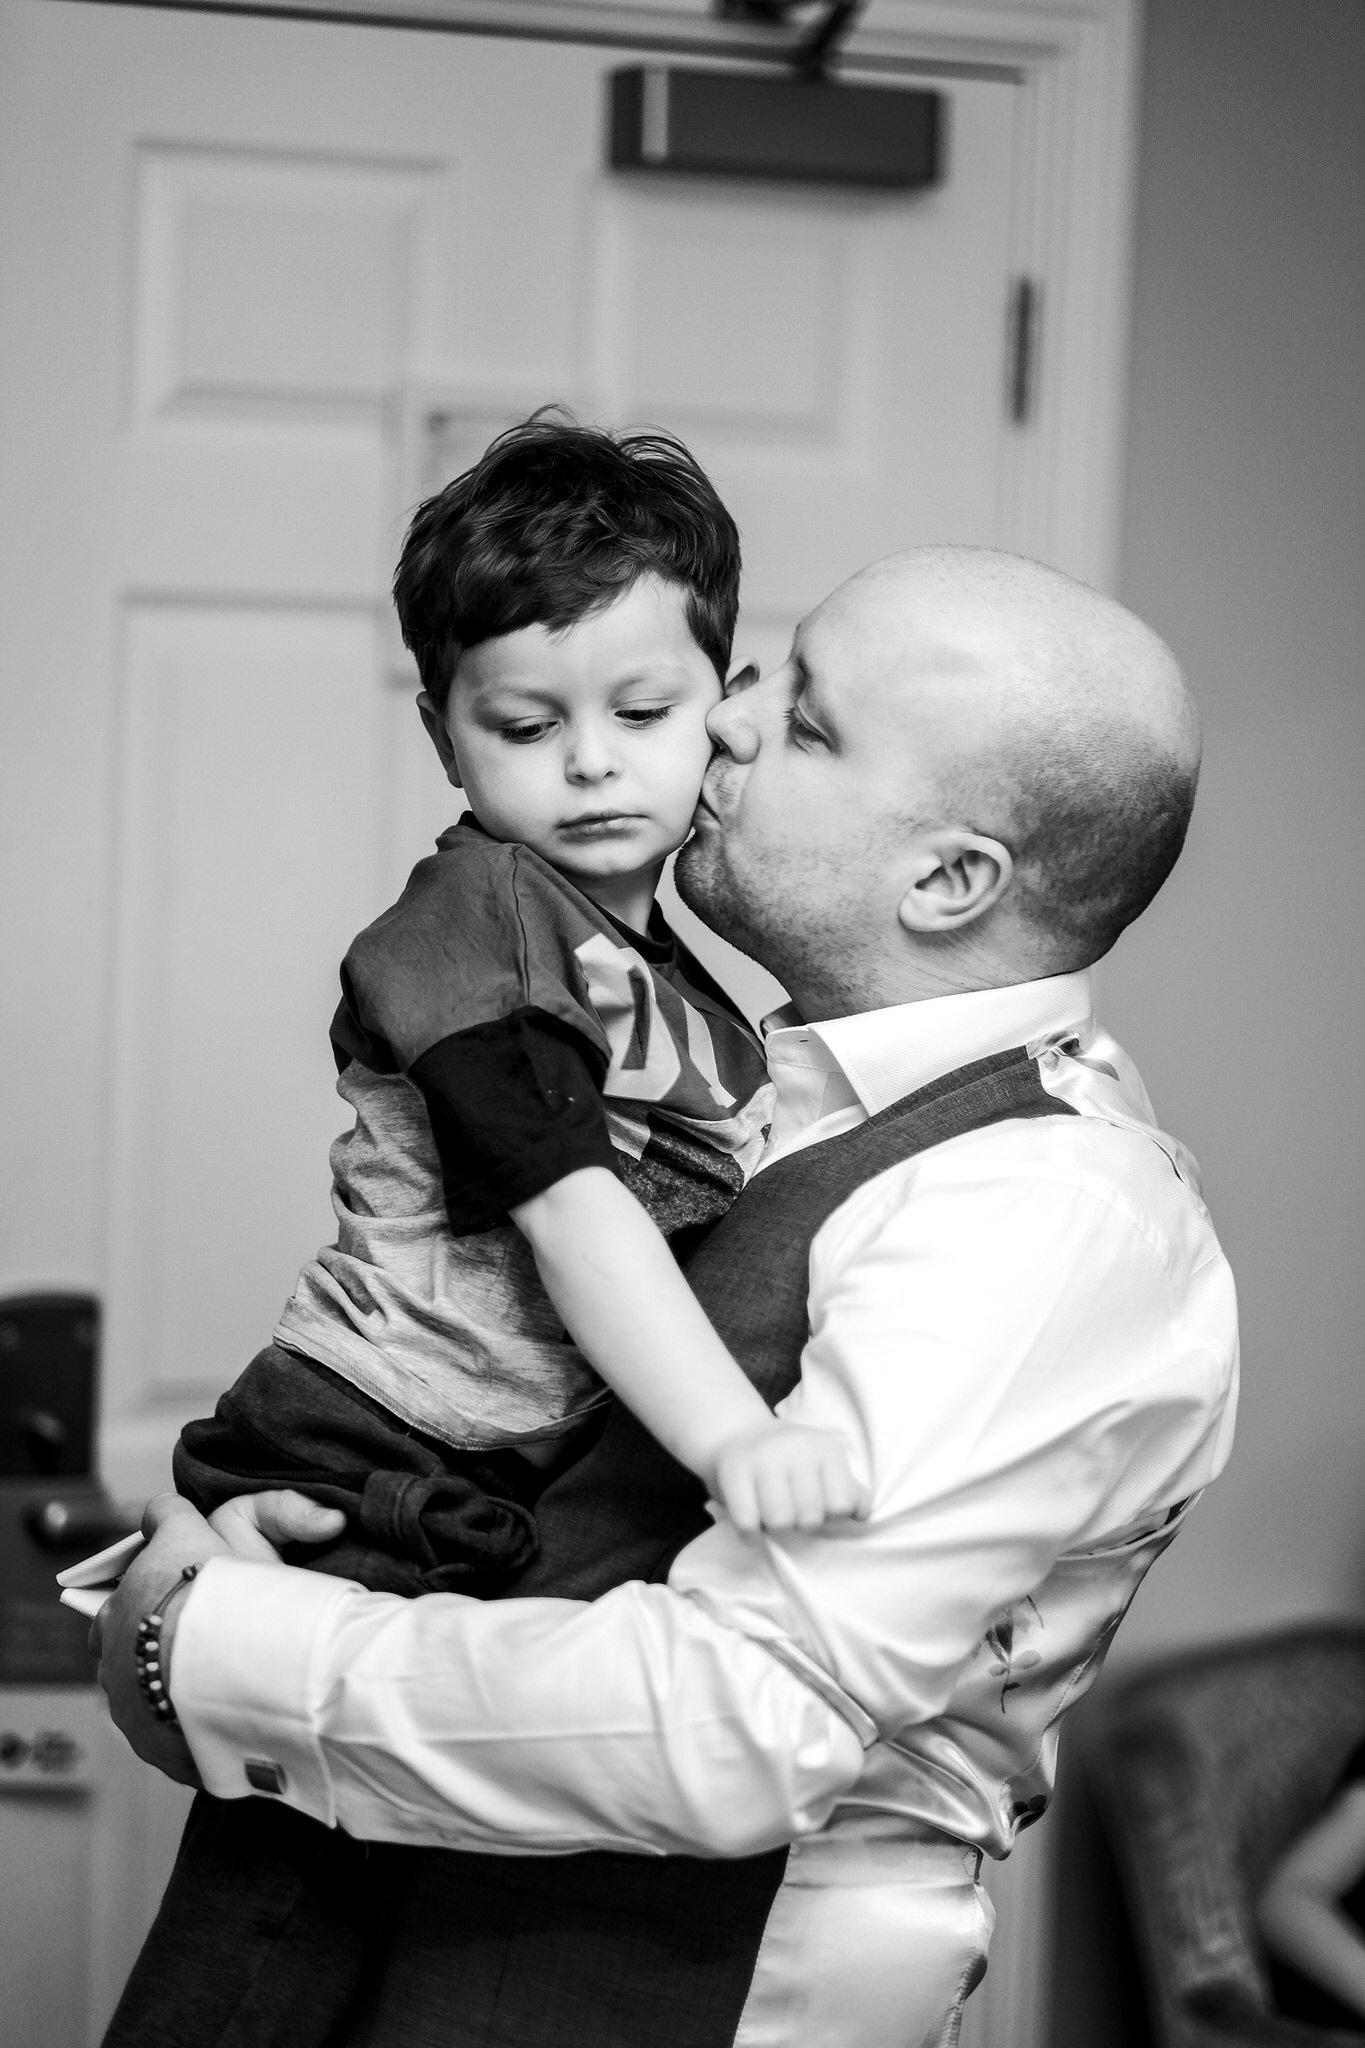 groom with son - Authentic Wedding photography.jpg